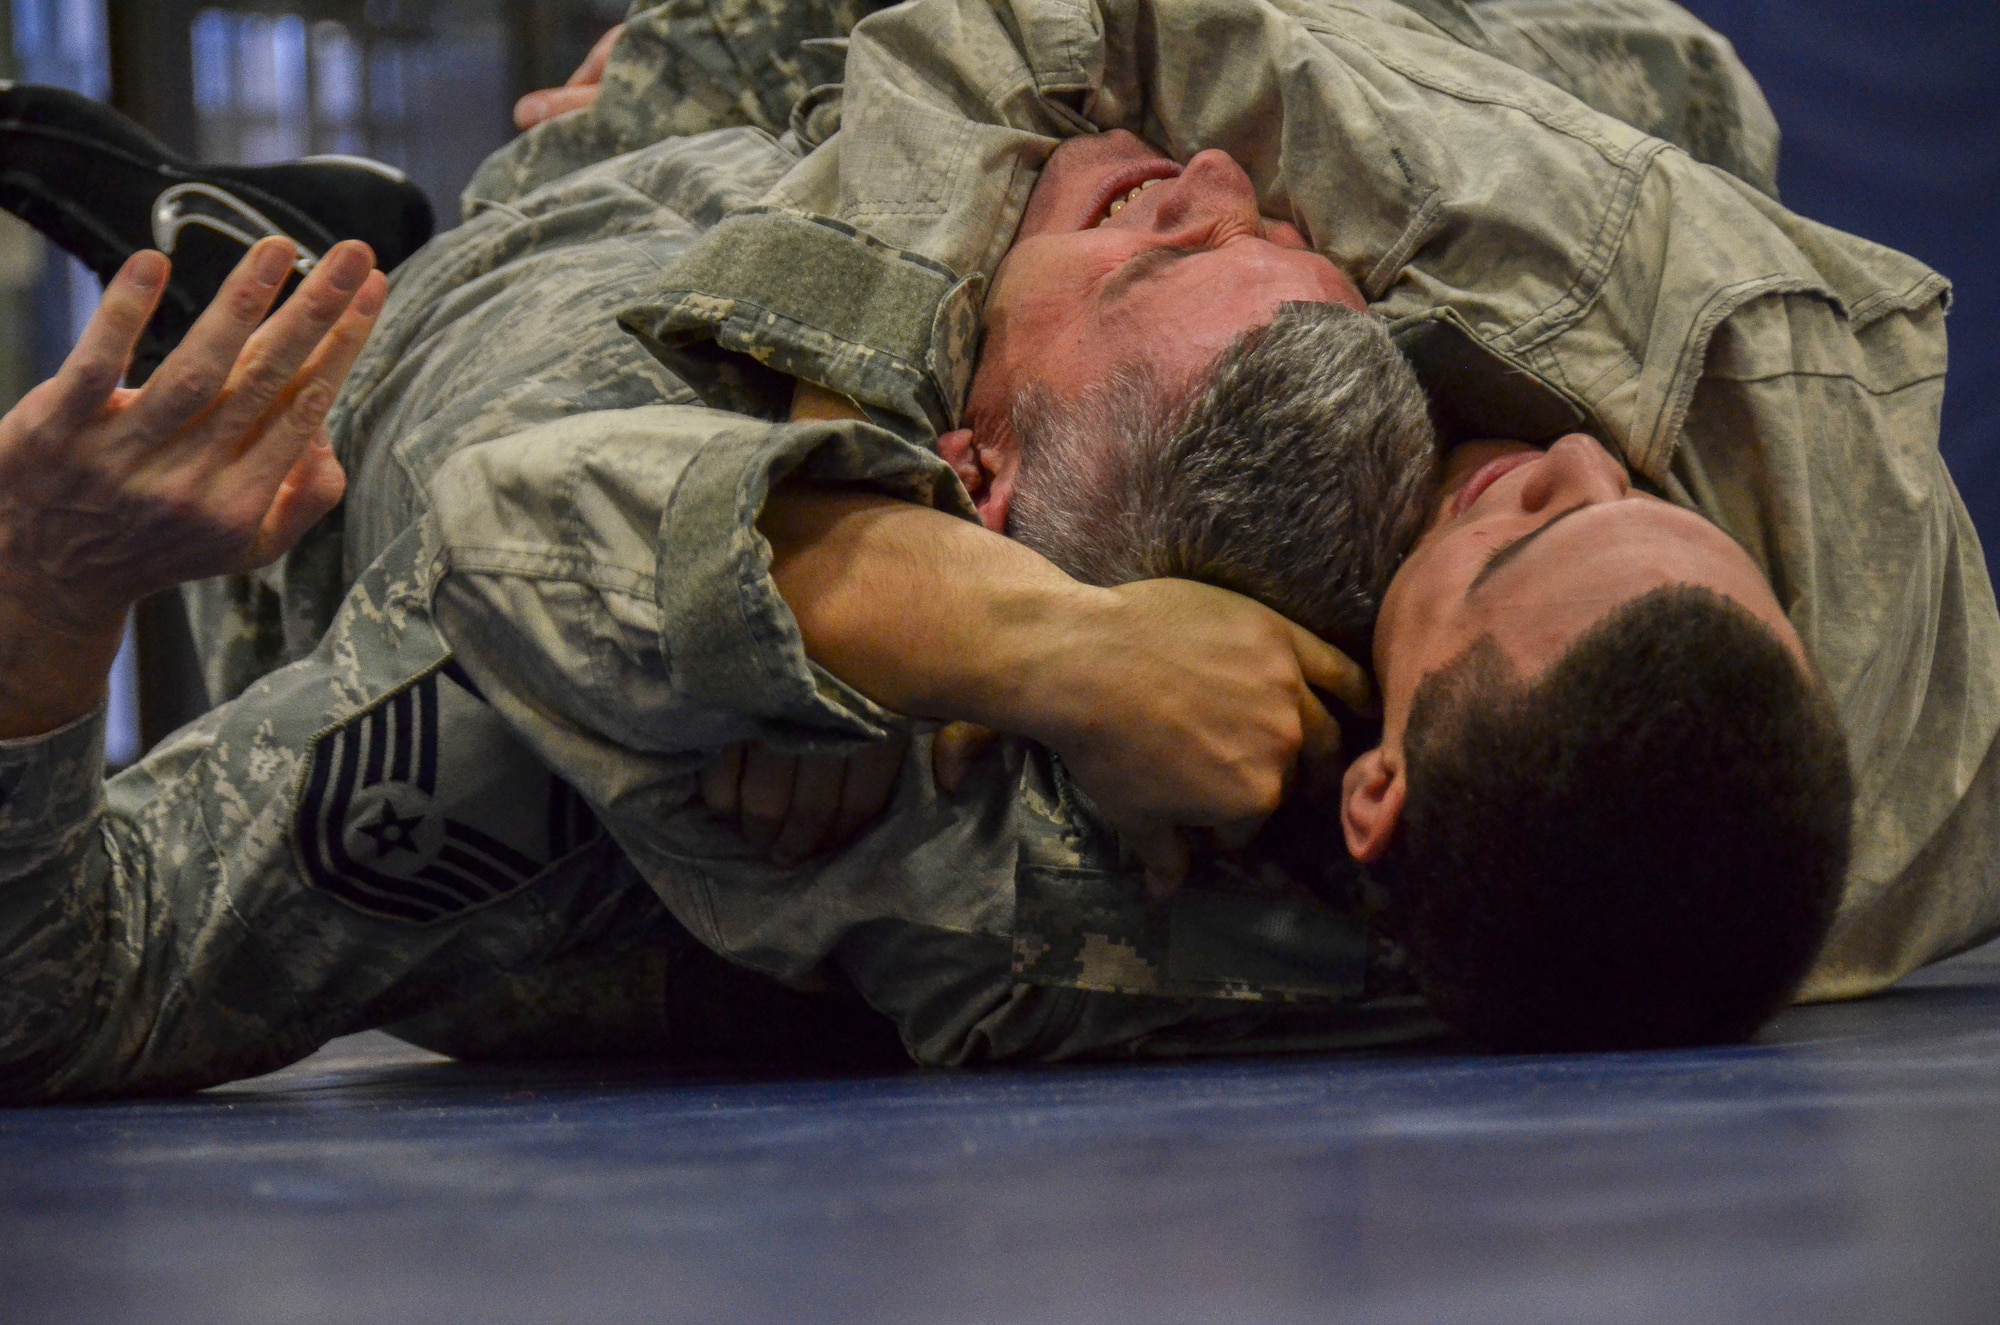 Airman 1st Class Greg Vinueza, attempts to subdue Senior Master Sgt. Kevin Wendt, 612th Support Squadron, during the last man standing drill portion of the Modern Army Combatives Program (MACP) Basic Combatives Course Level 1 at Davis-Monthan Air Force Base, Ariz., Jan. 16, 2014. The 40-hour course focuses on the three phases of basic fighting strategy; close the distance, gain the dominate position, and how to finish the fight. (U.S. Air Force photo by Staff Sgt. Adam Grant/Released)